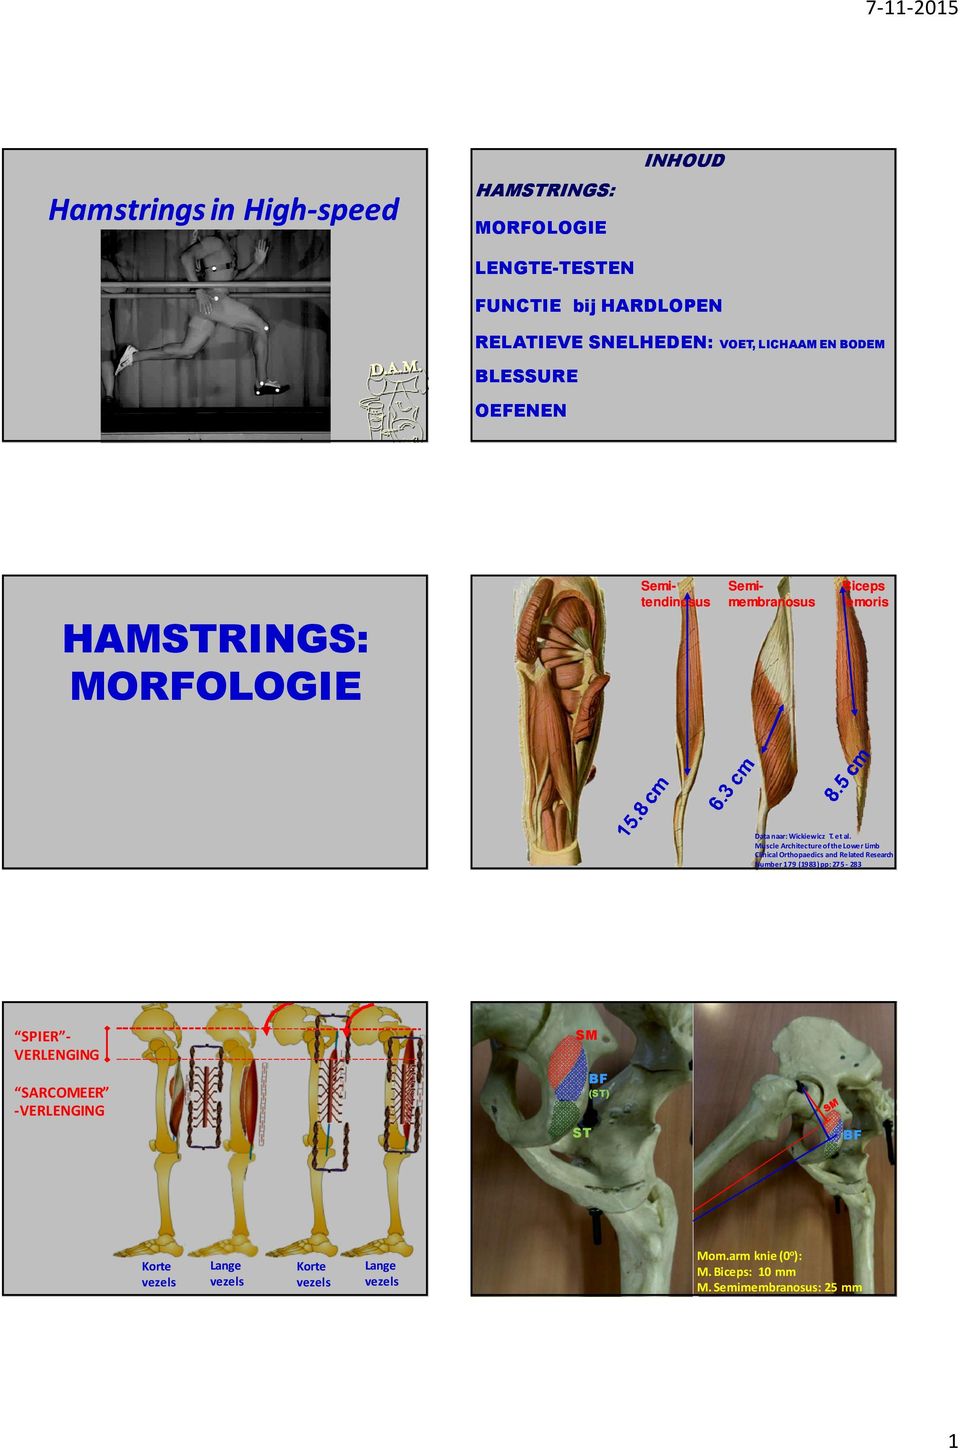 Muscle Architecture of the Lower Limb Clinical Orthopaedics and Related Research Number 79 (983) pp: 275-283 SPIER - VERLENGING SARCOMEER -VERLENGING SM ST BF (ST) N.